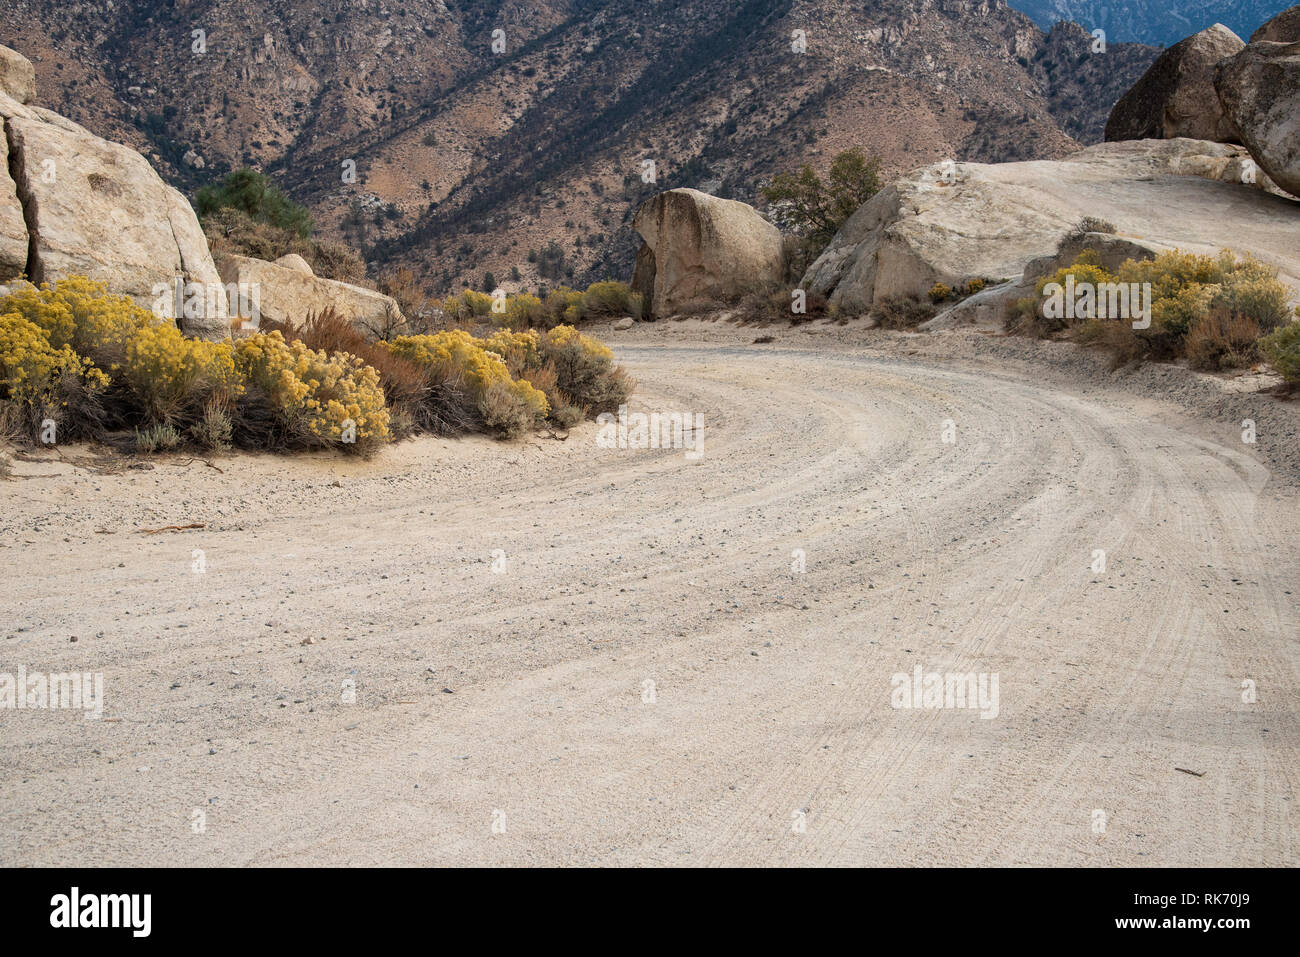 Closeup of mountain dirt road curving around rocks with yellow bushes on each side of road. Stock Photo